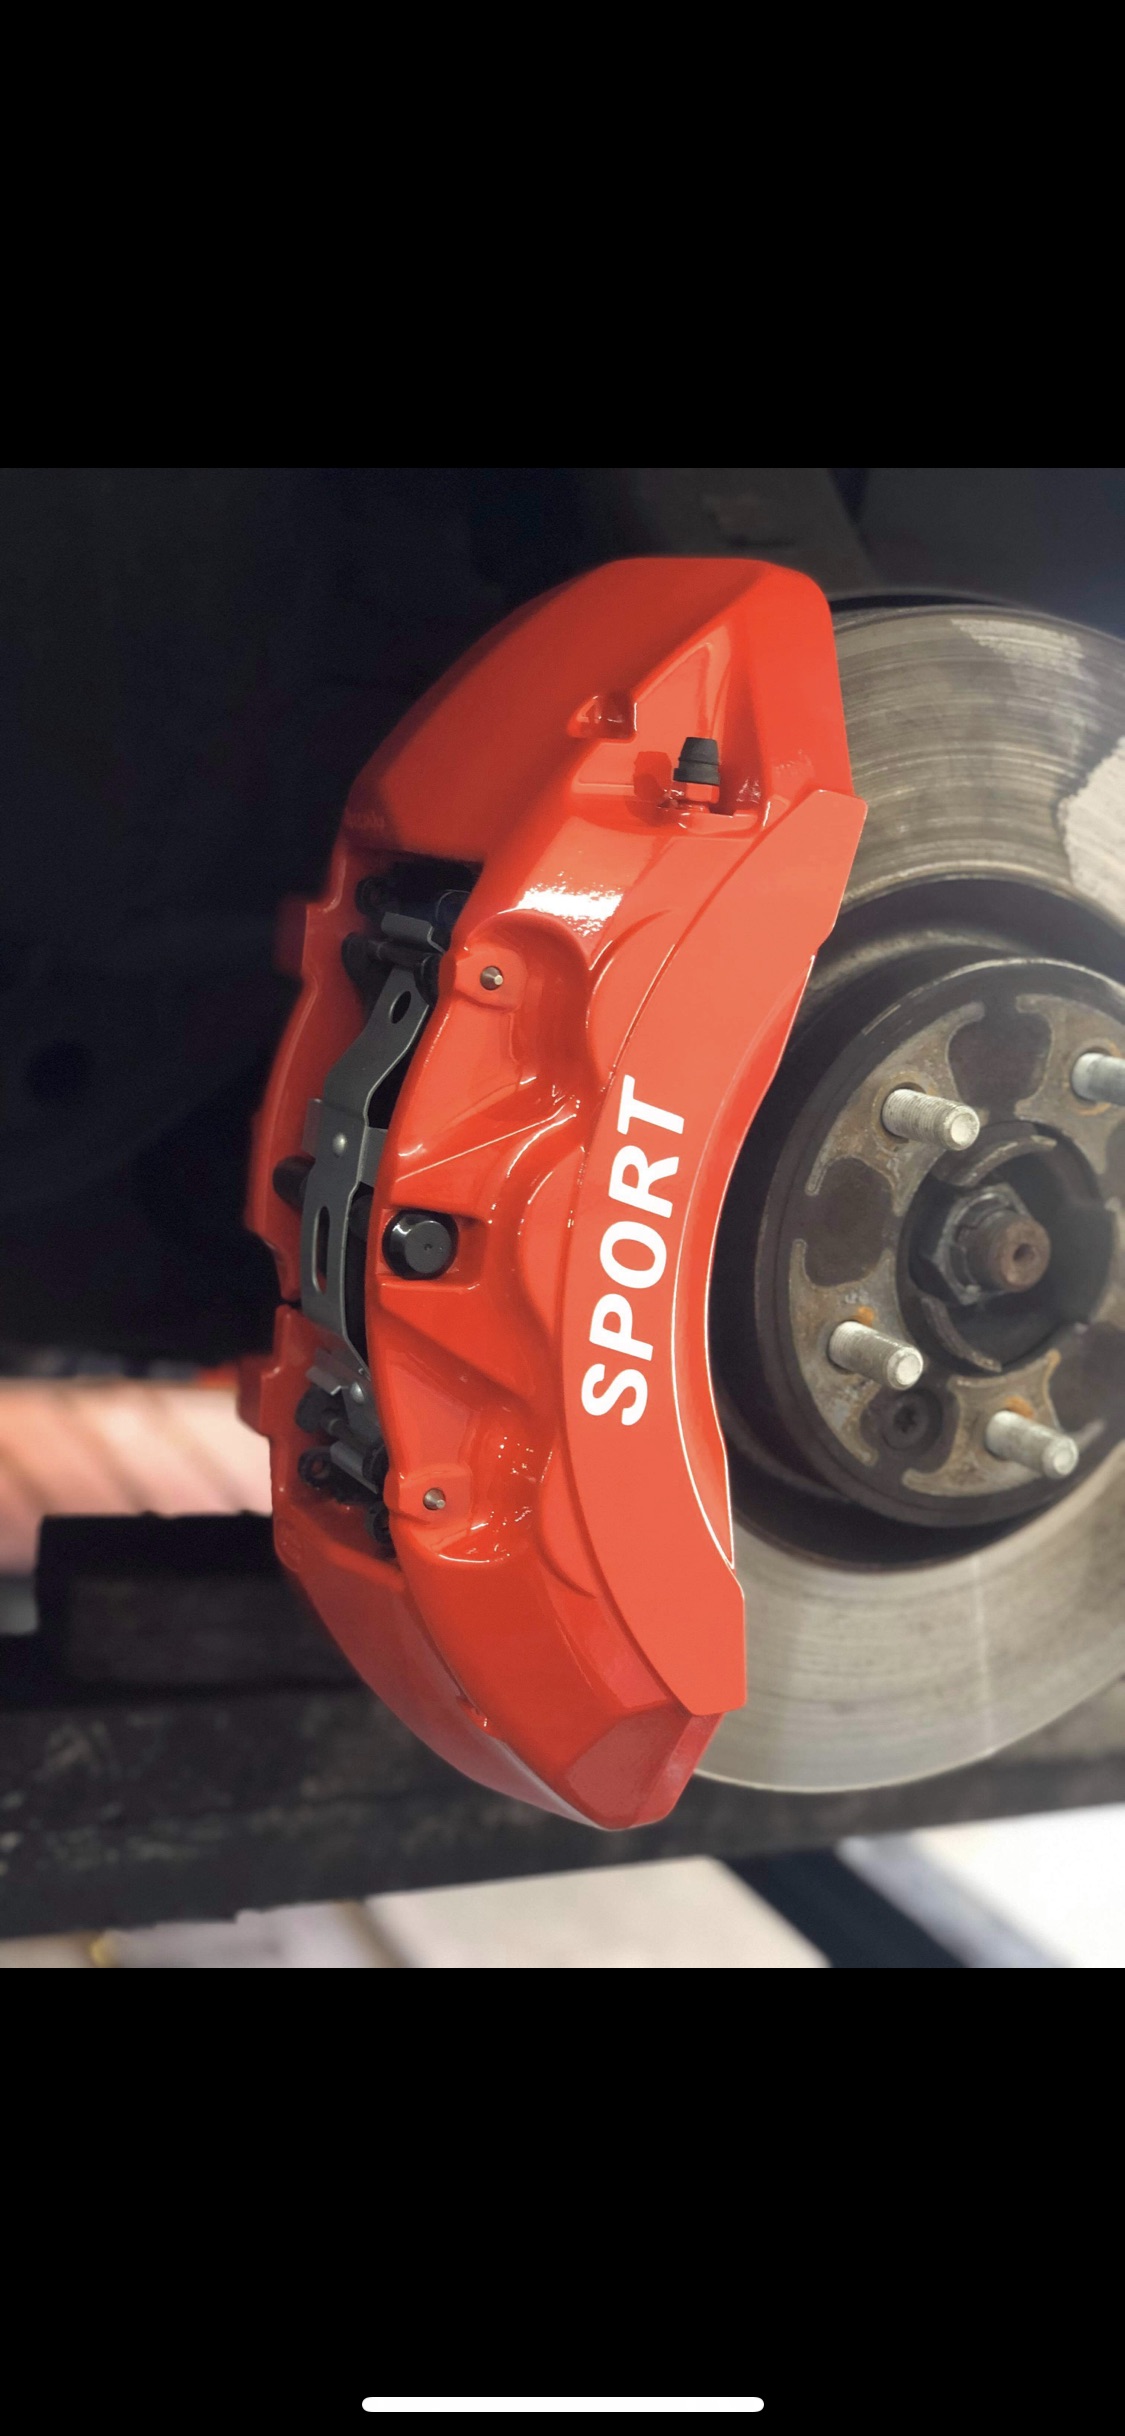 Range Rover Sport Calipers Painted